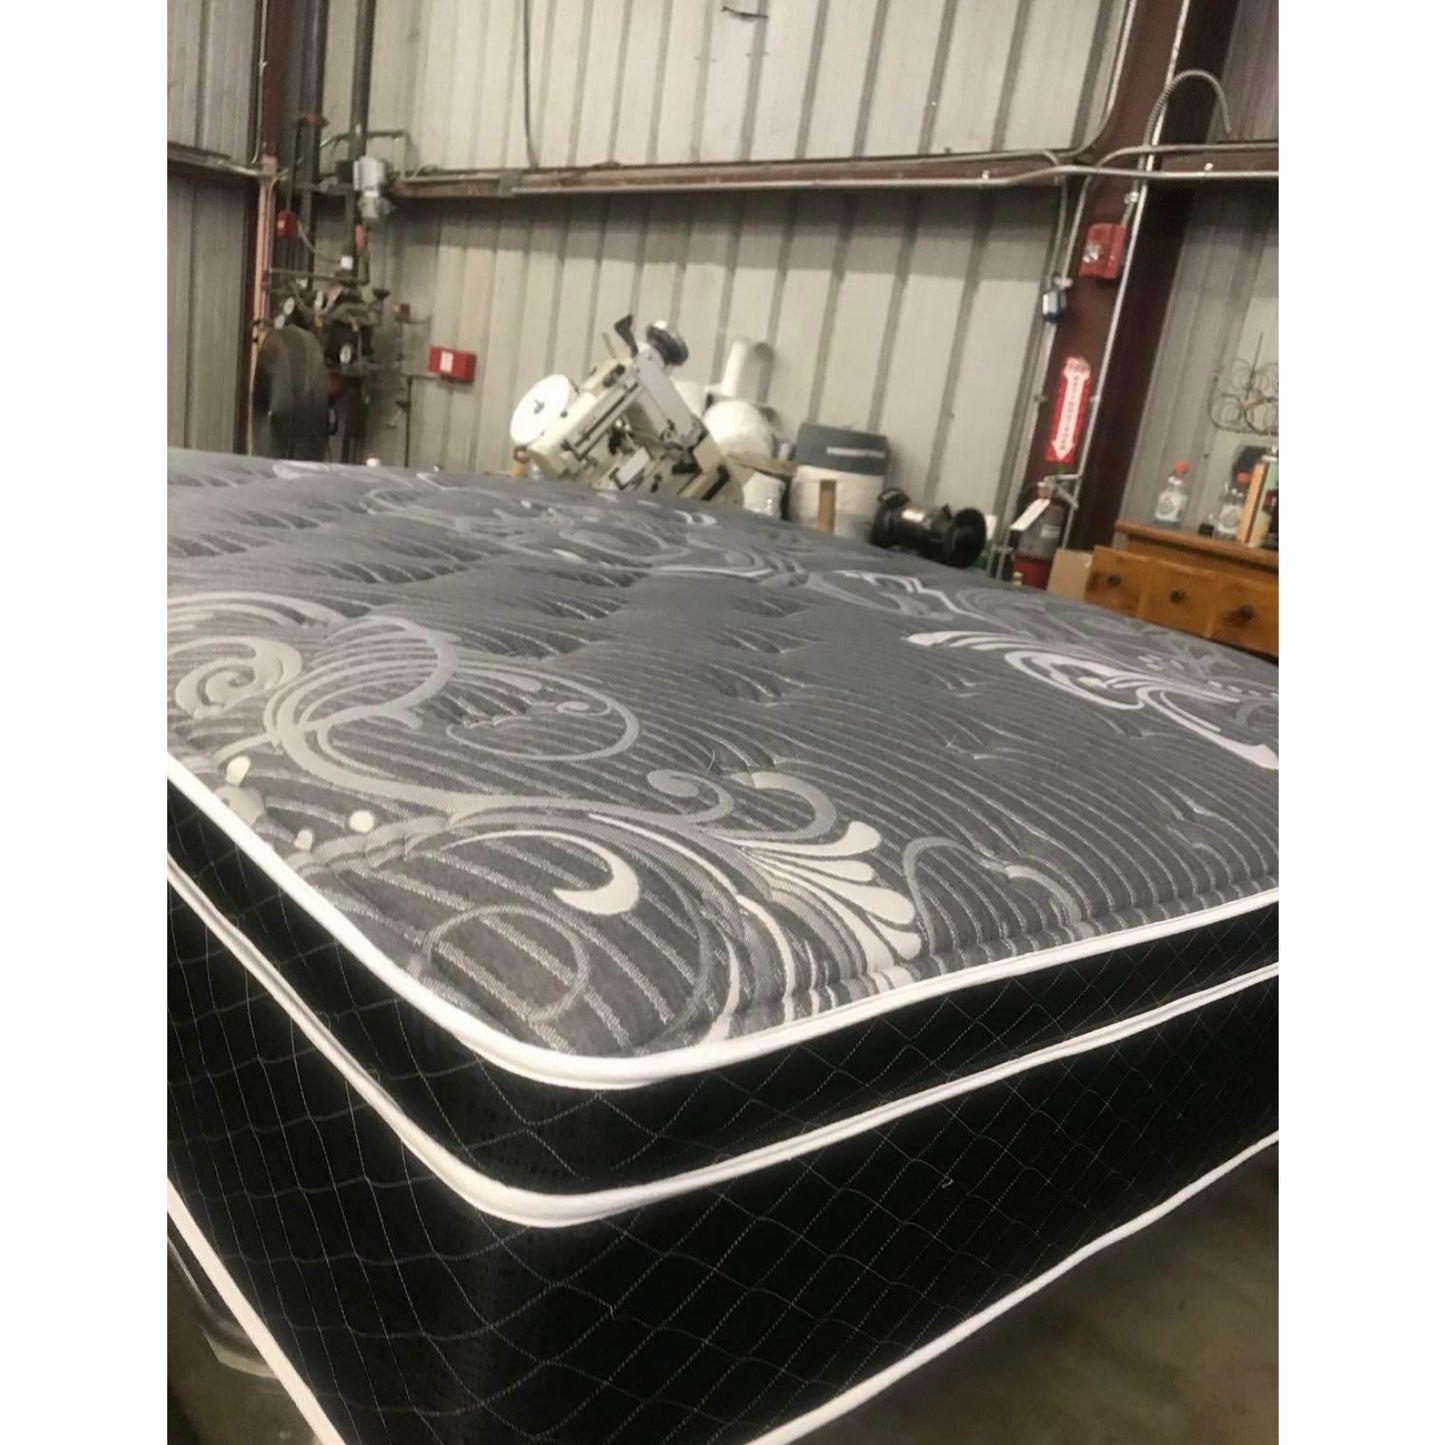 Vivians 13" Innerspring Mattress With Black Quilt, Inside Of A Warehouse, Corner View, Zoomed In